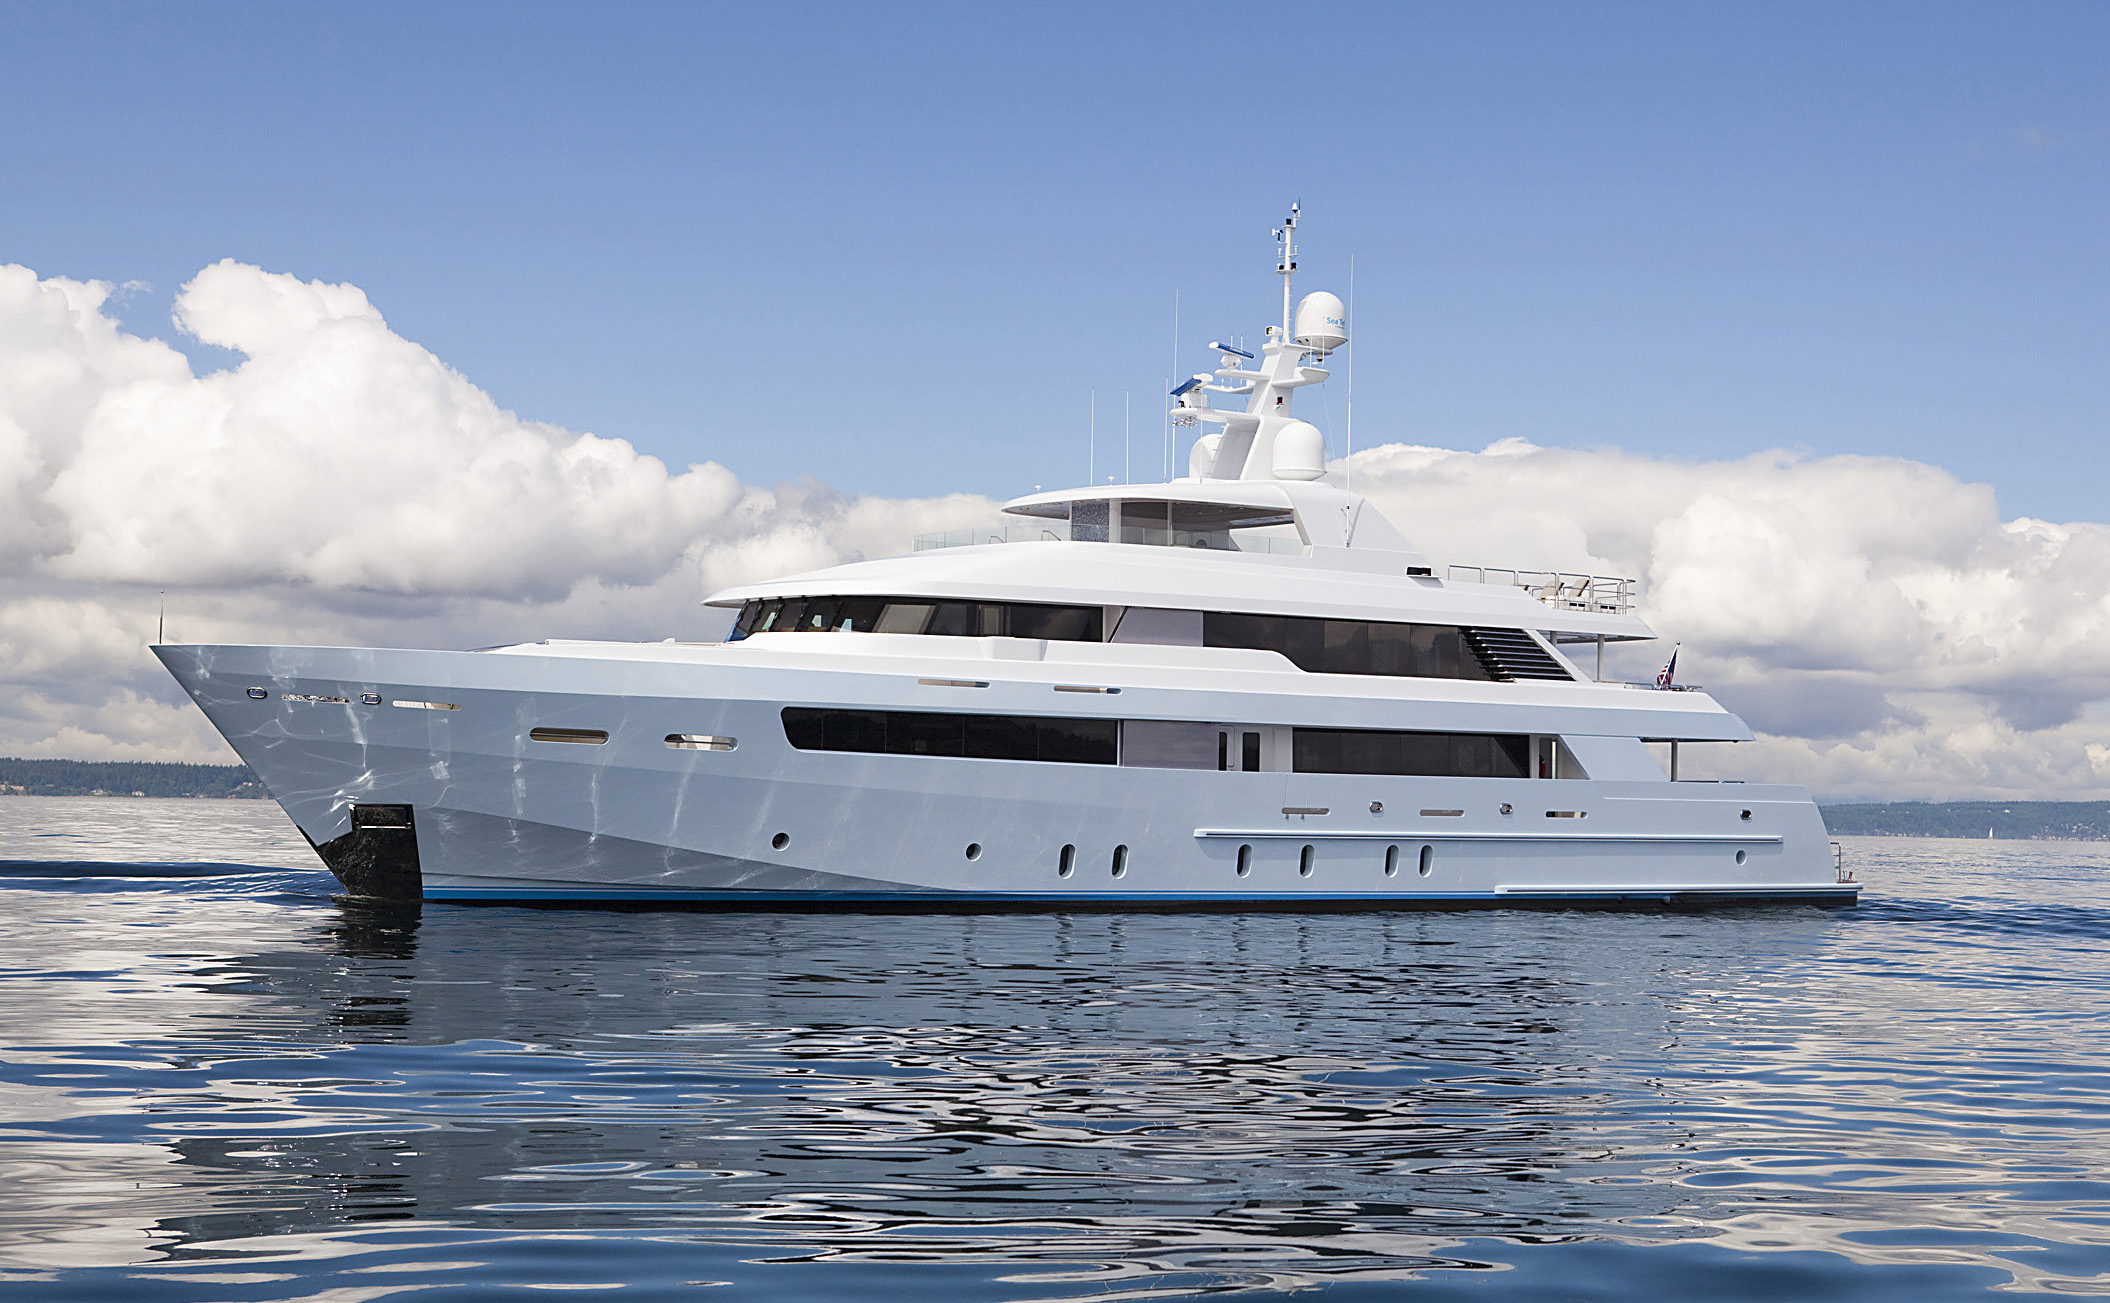 151 foot yacht price